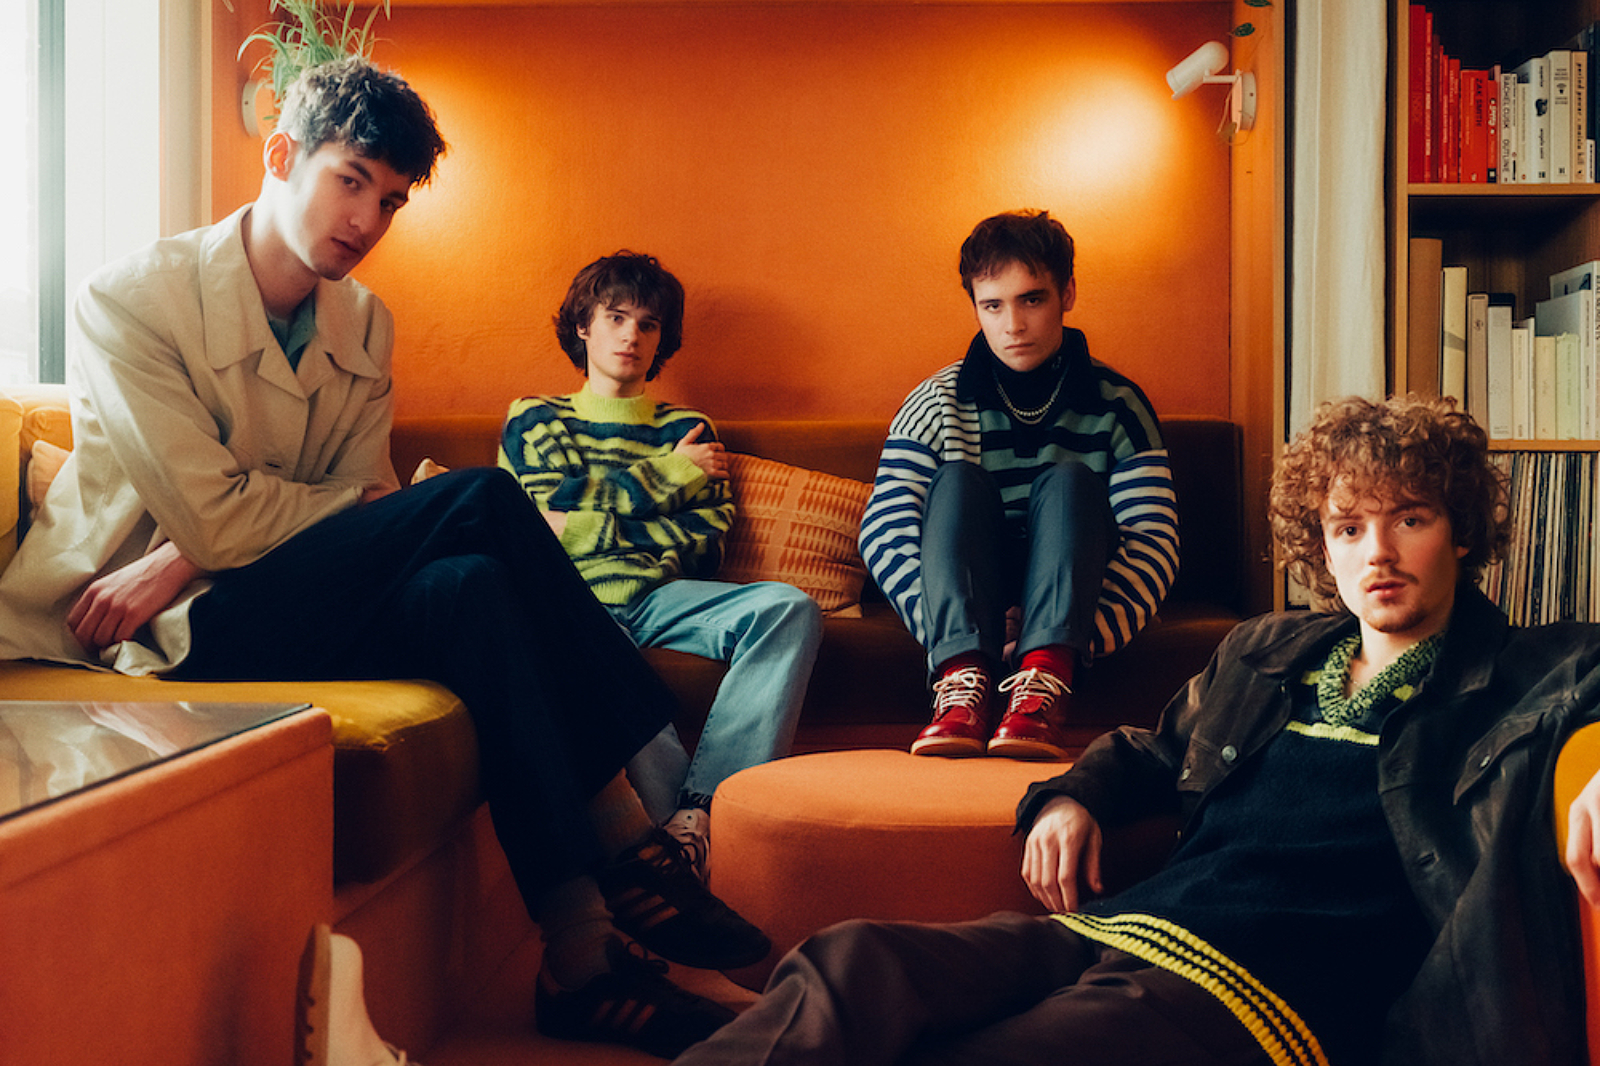 The Lounge Society share new single 'No Driver'